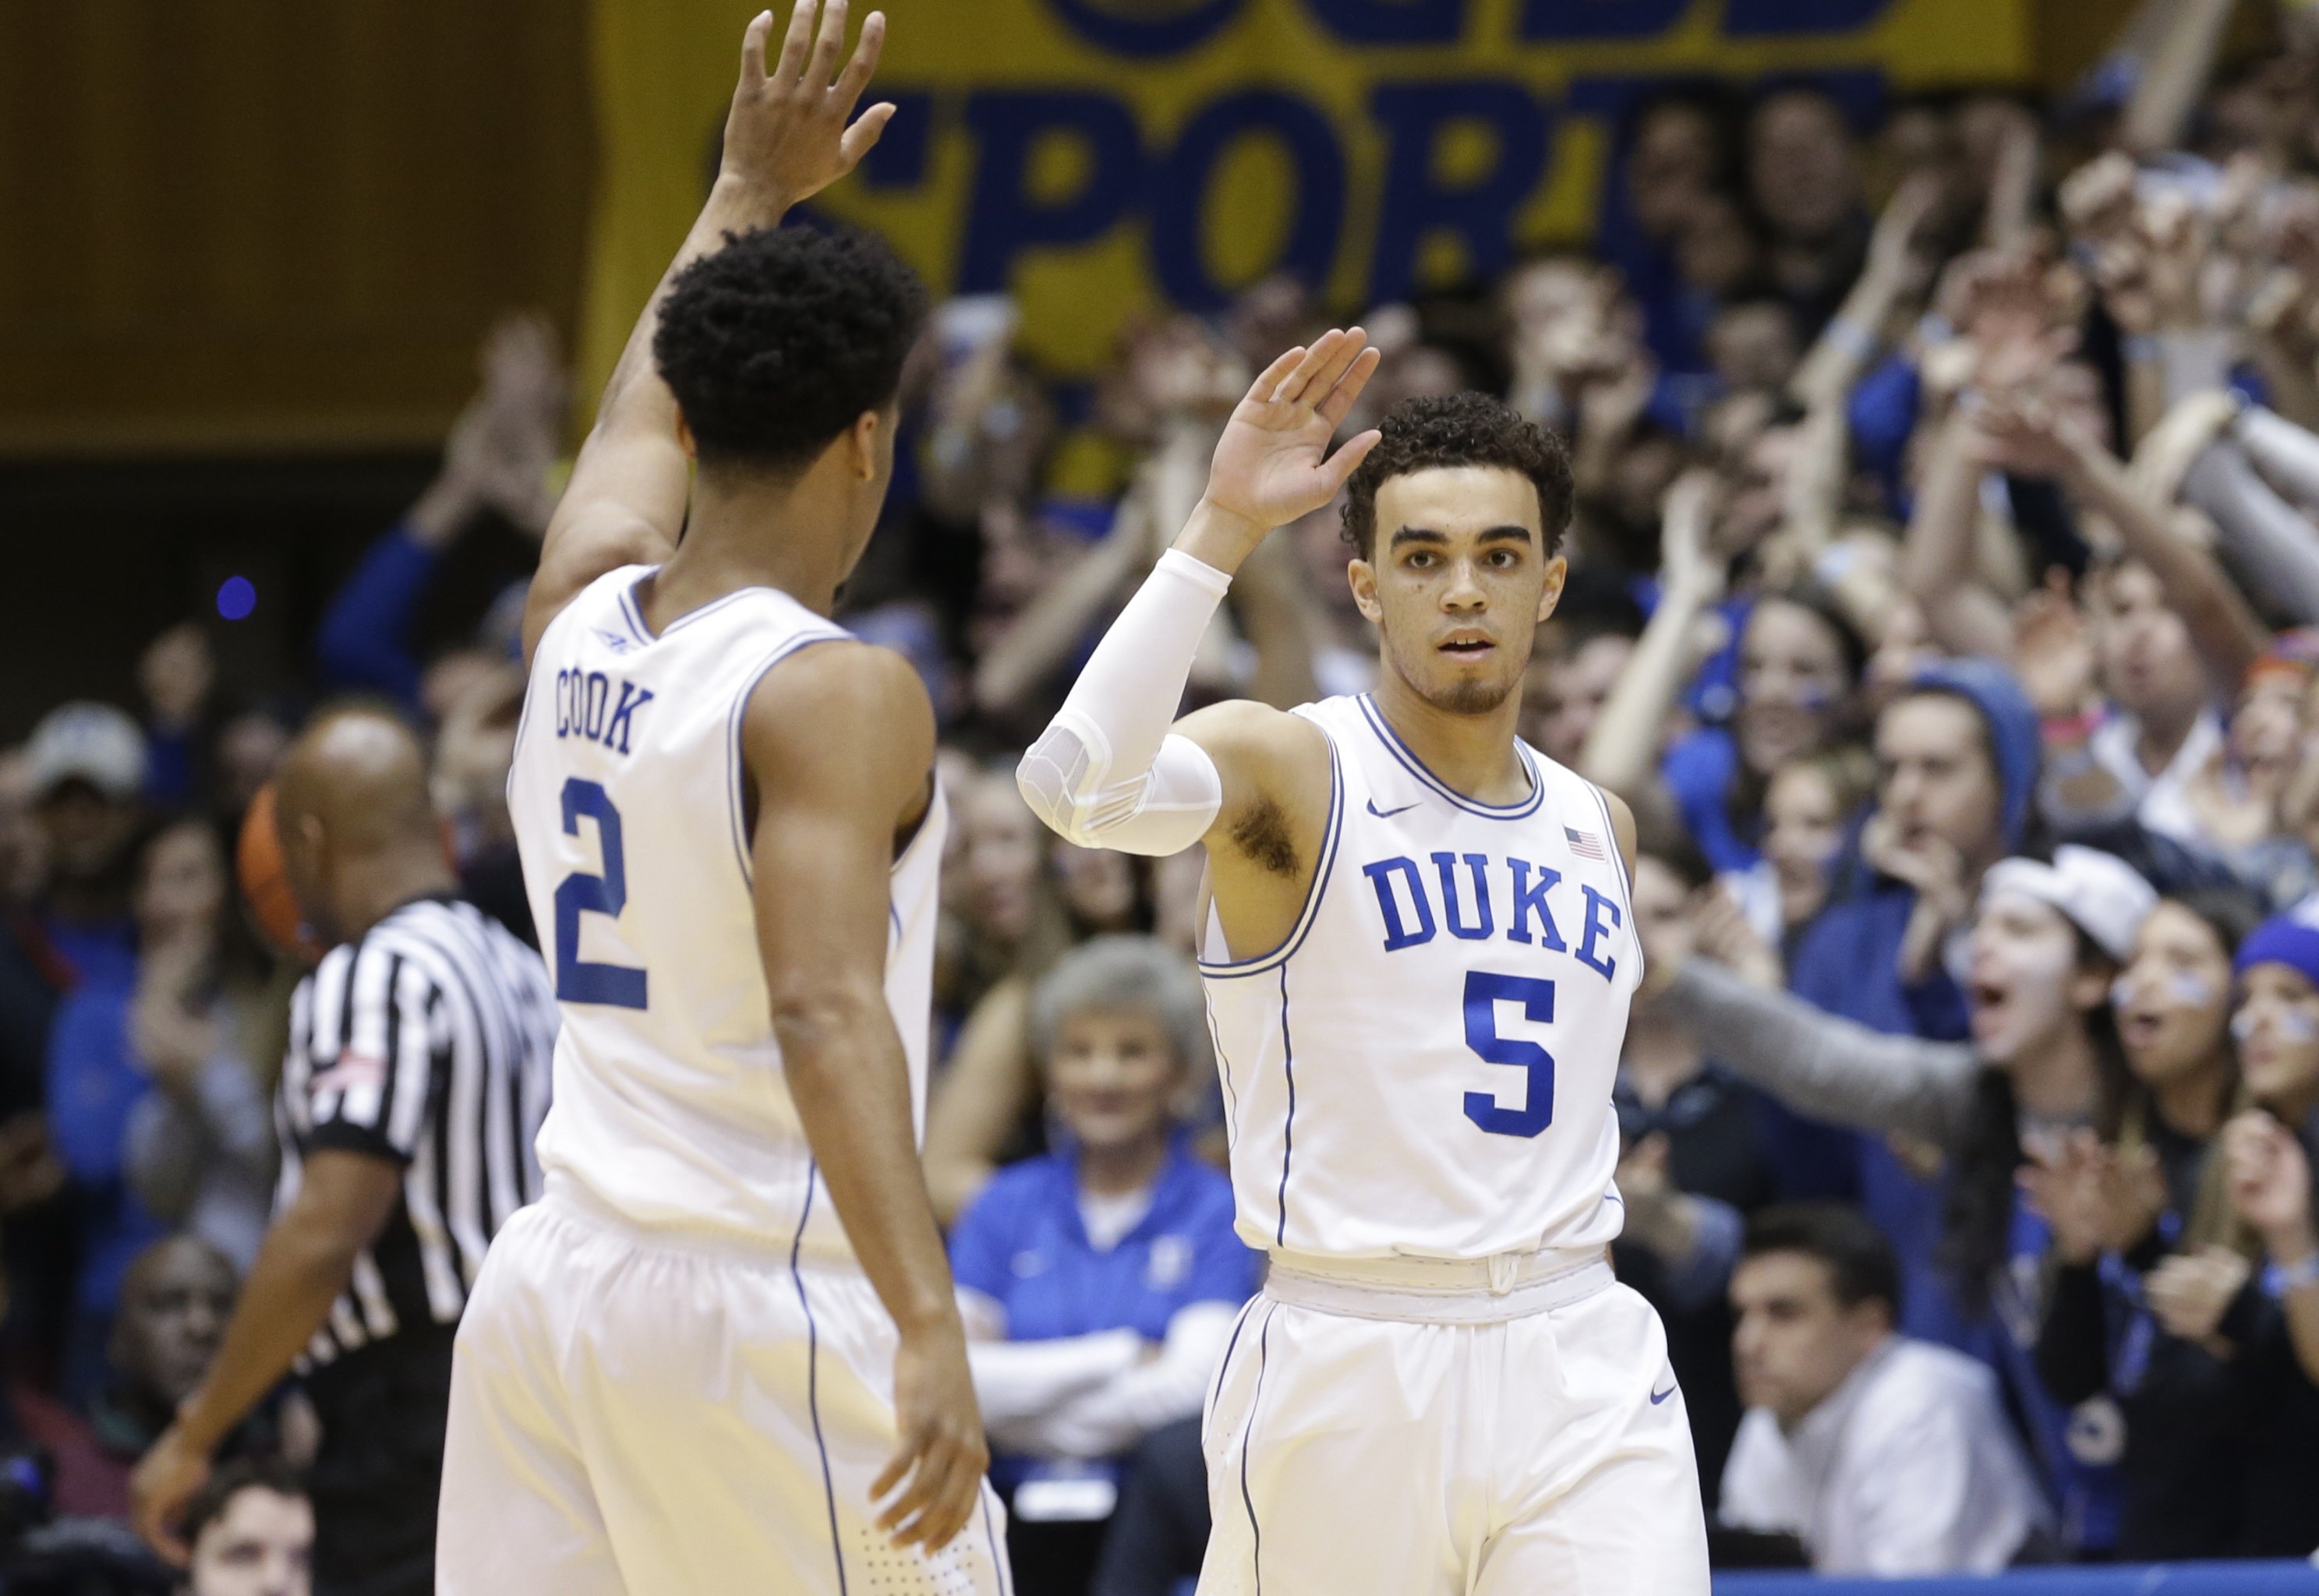 Duke's Tyus Jones Was Born to Play in the Final Four